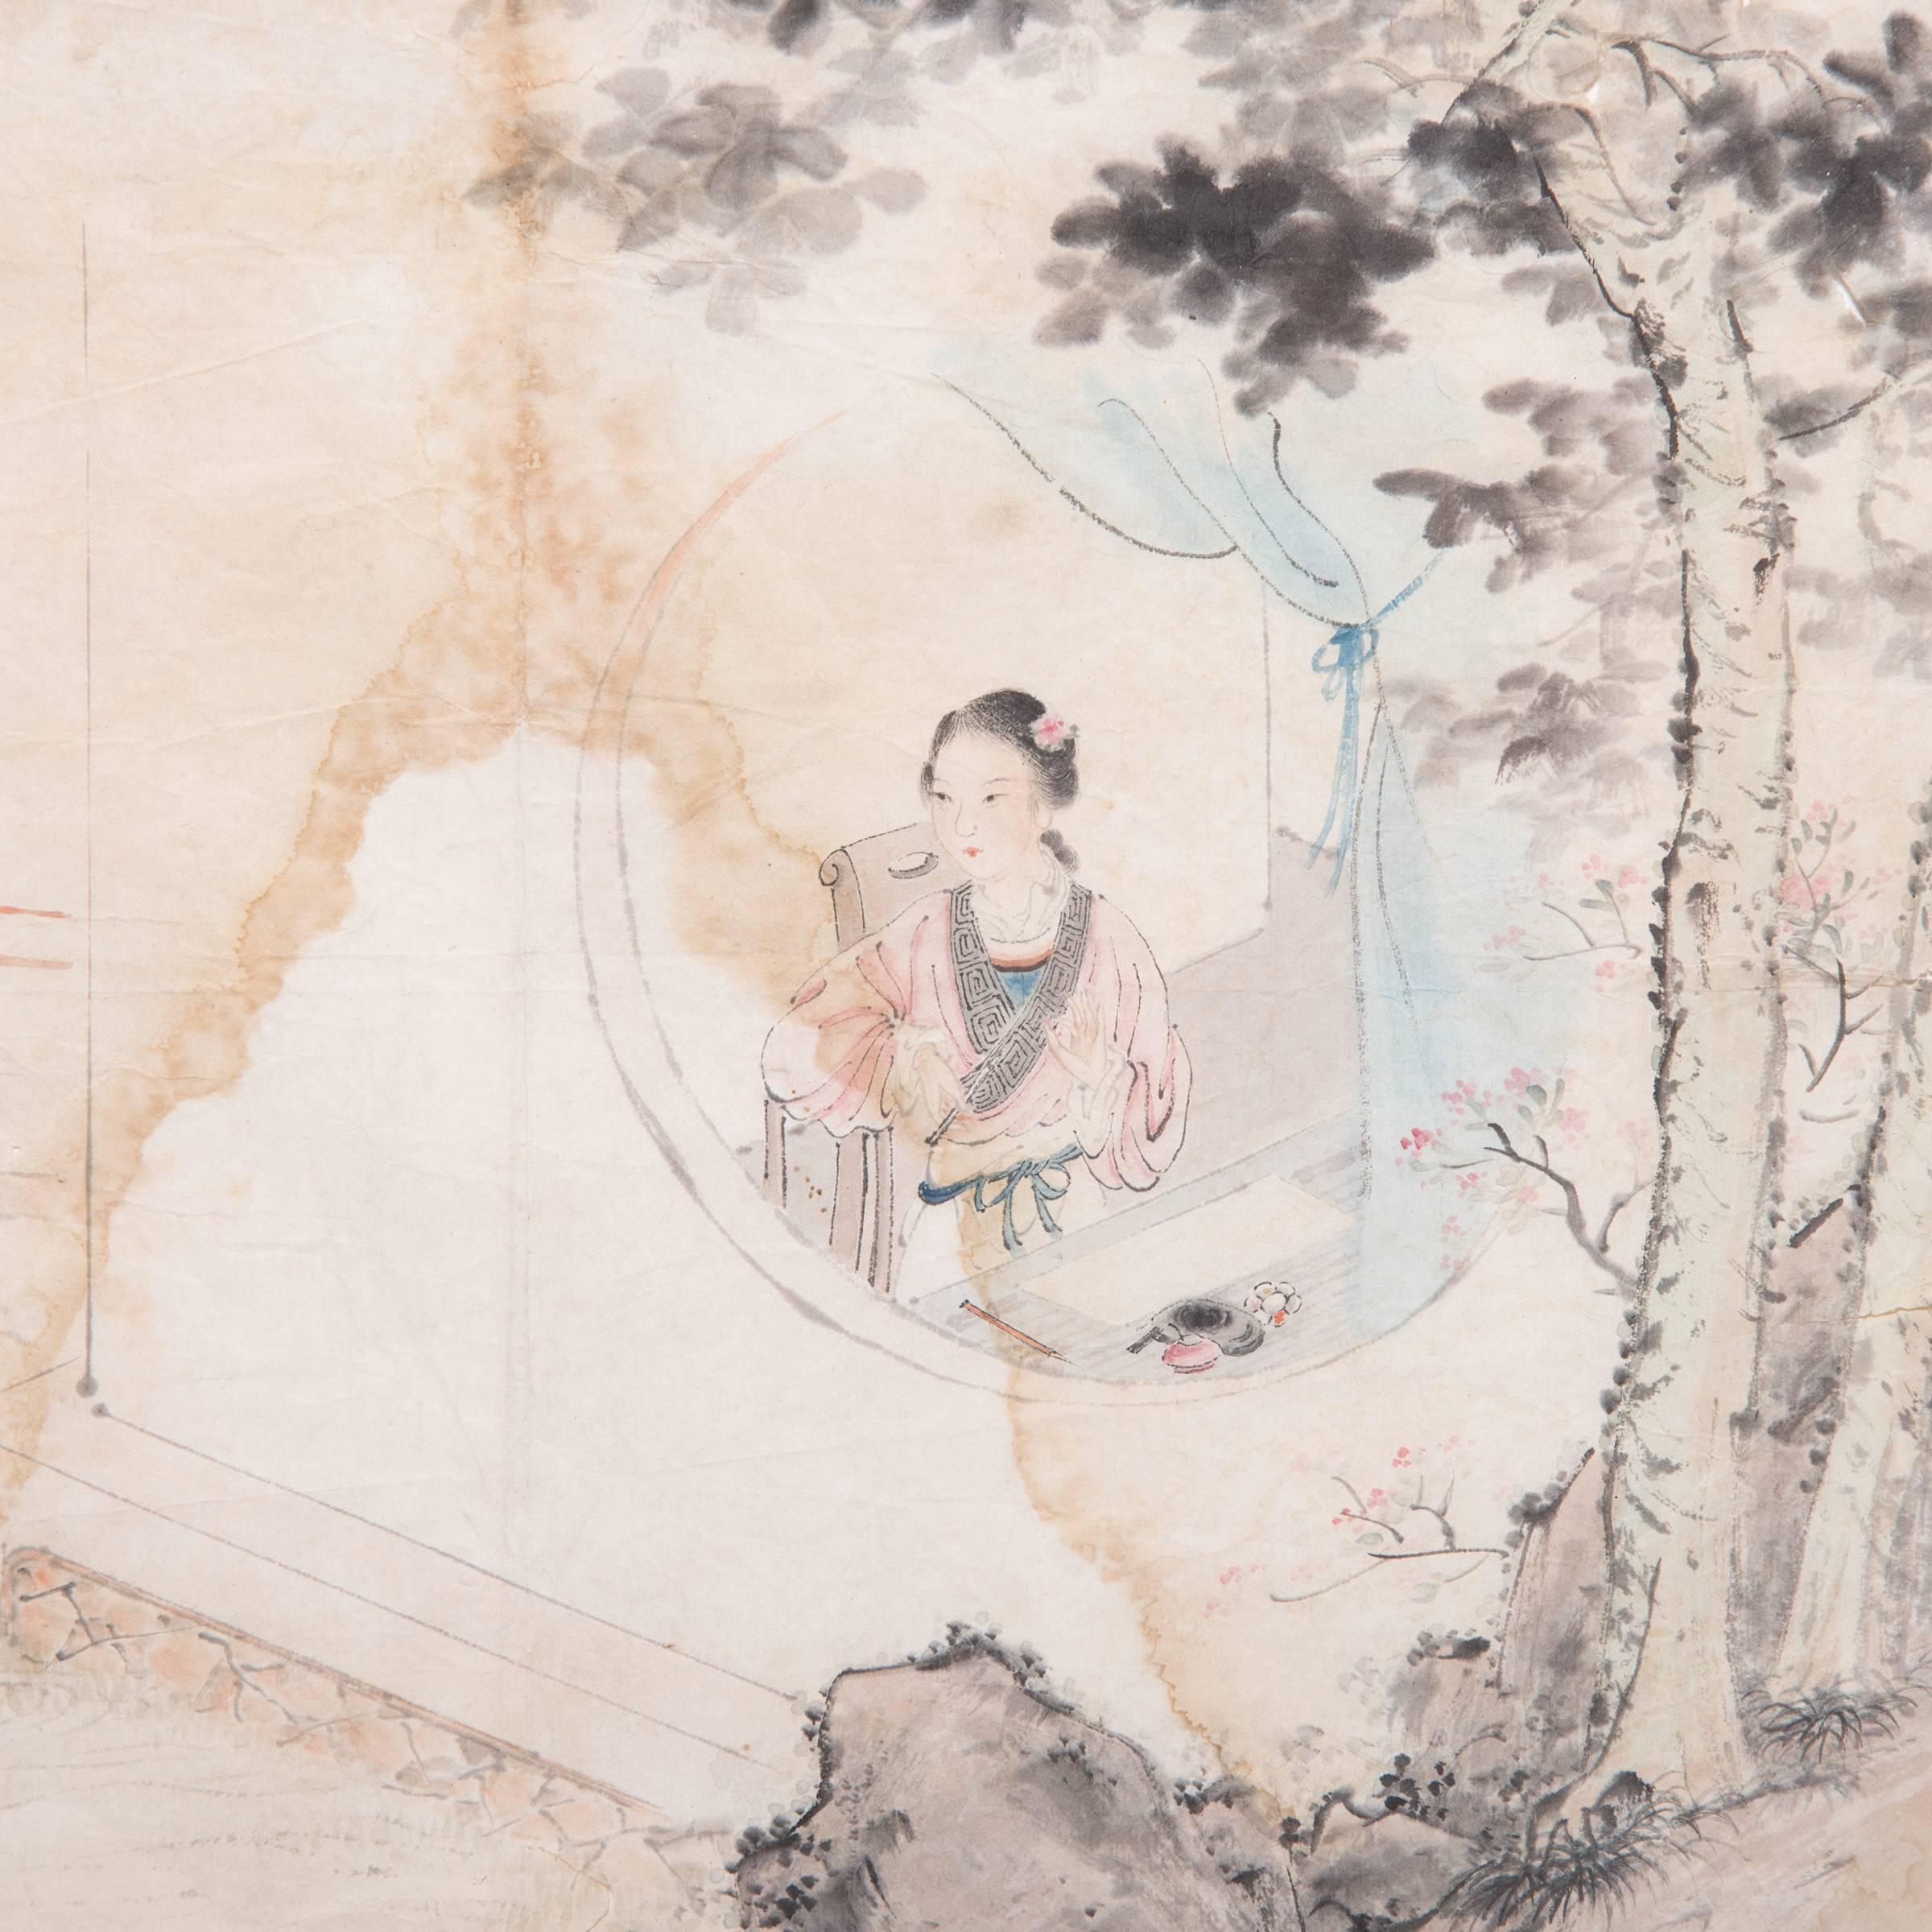 This delightful work on paper was found in Shanghai. Created in 1977, the painting by artist Yun Fung depicts a young woman gazing out her window, “leisurely painting on a sunny day” as the characters in the upper left-hand corner describe. With her